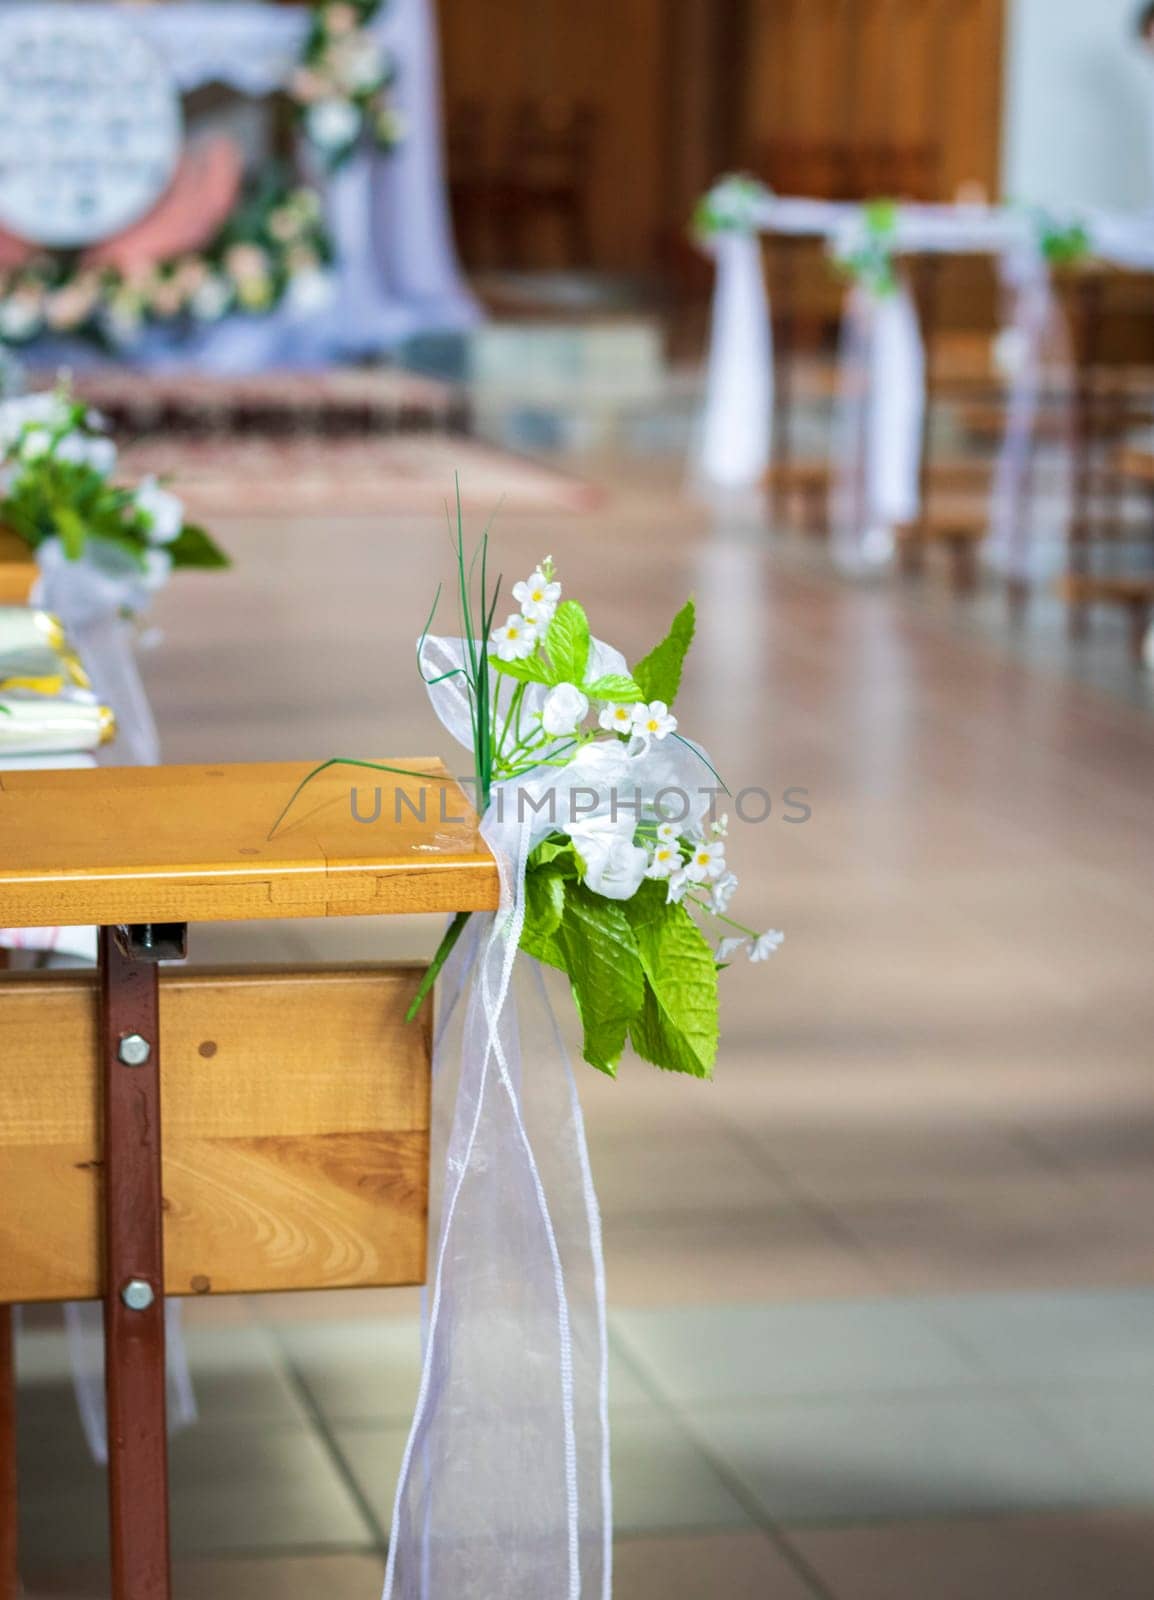 Close up shot of the pews at the Roman catholic church decorated with flowers